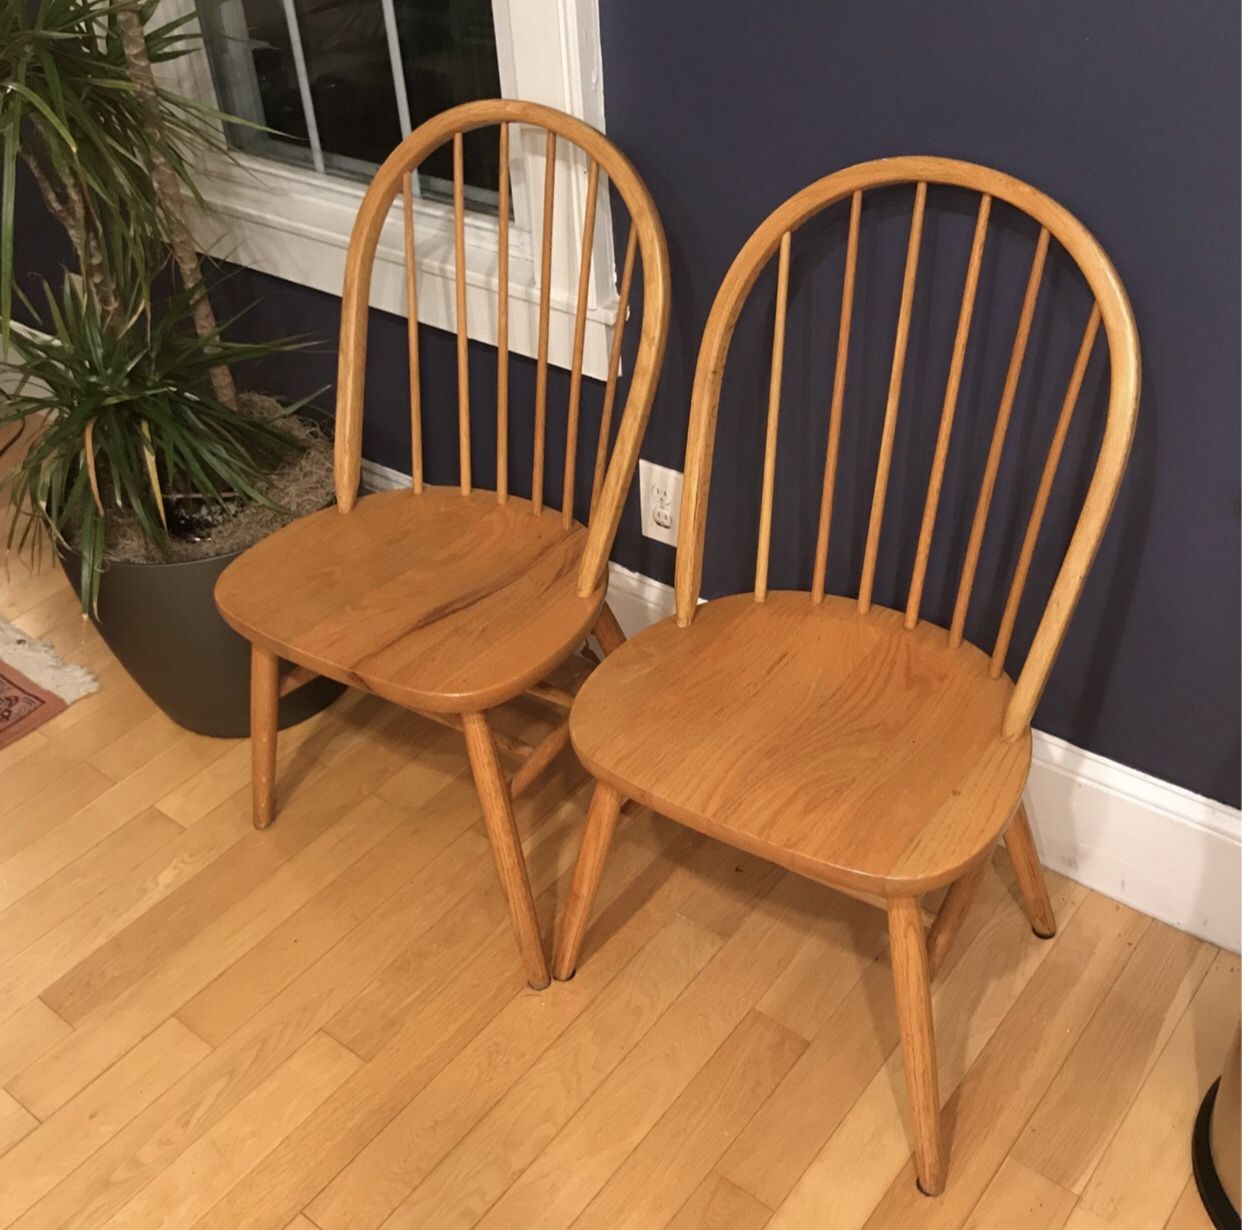 FREE 2 Solid Oak Chairs